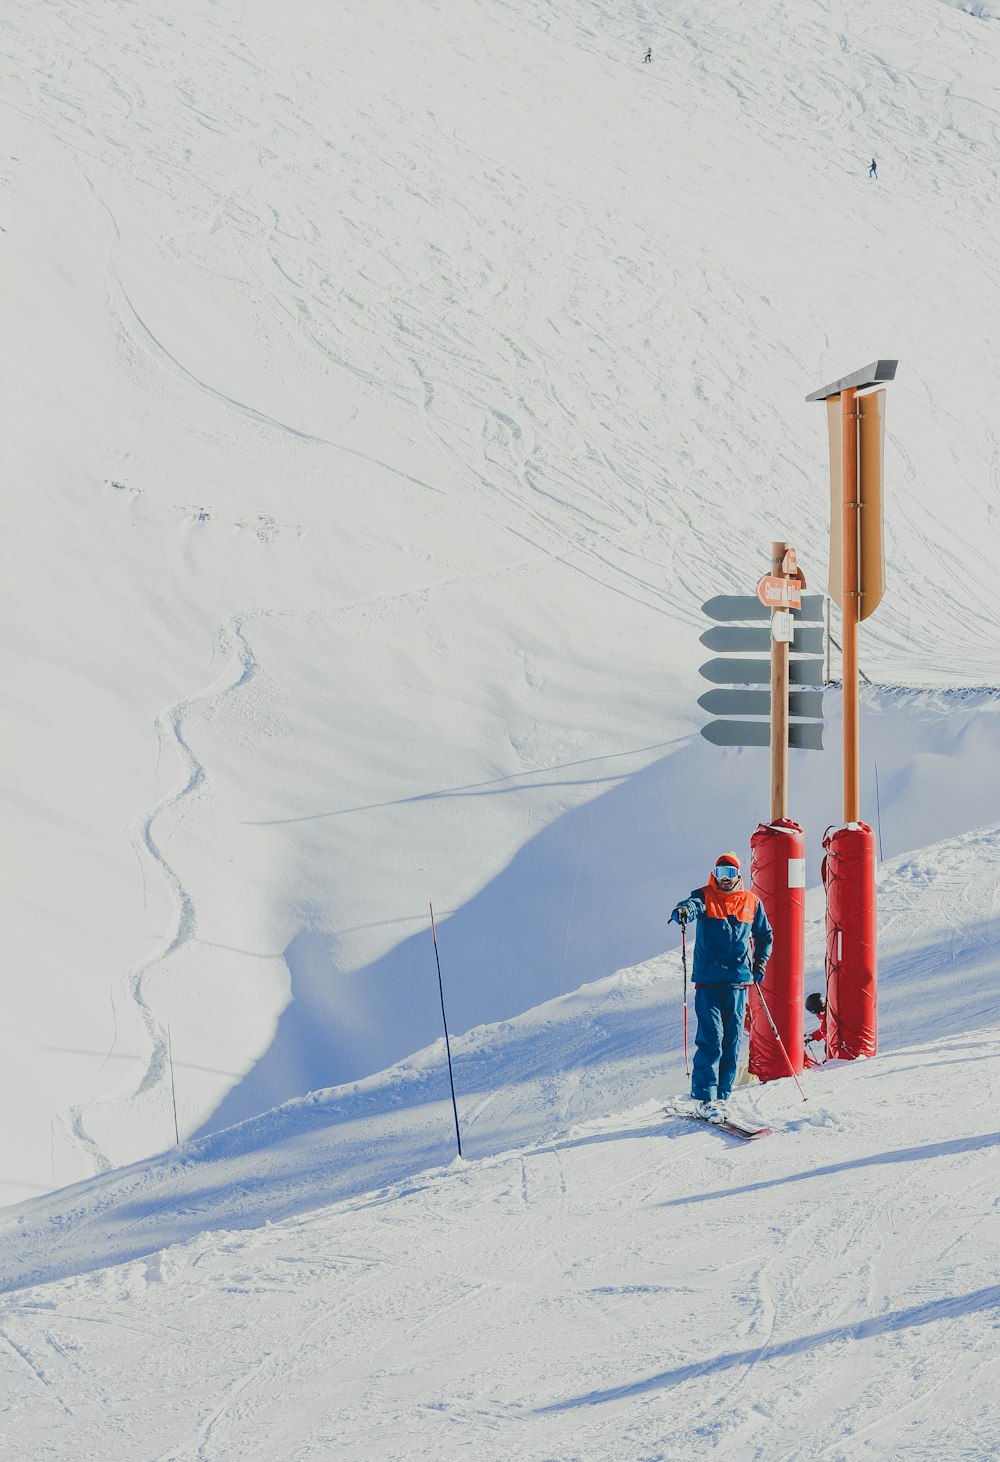 man in blue jacket holding ski poles standing near red and brown post